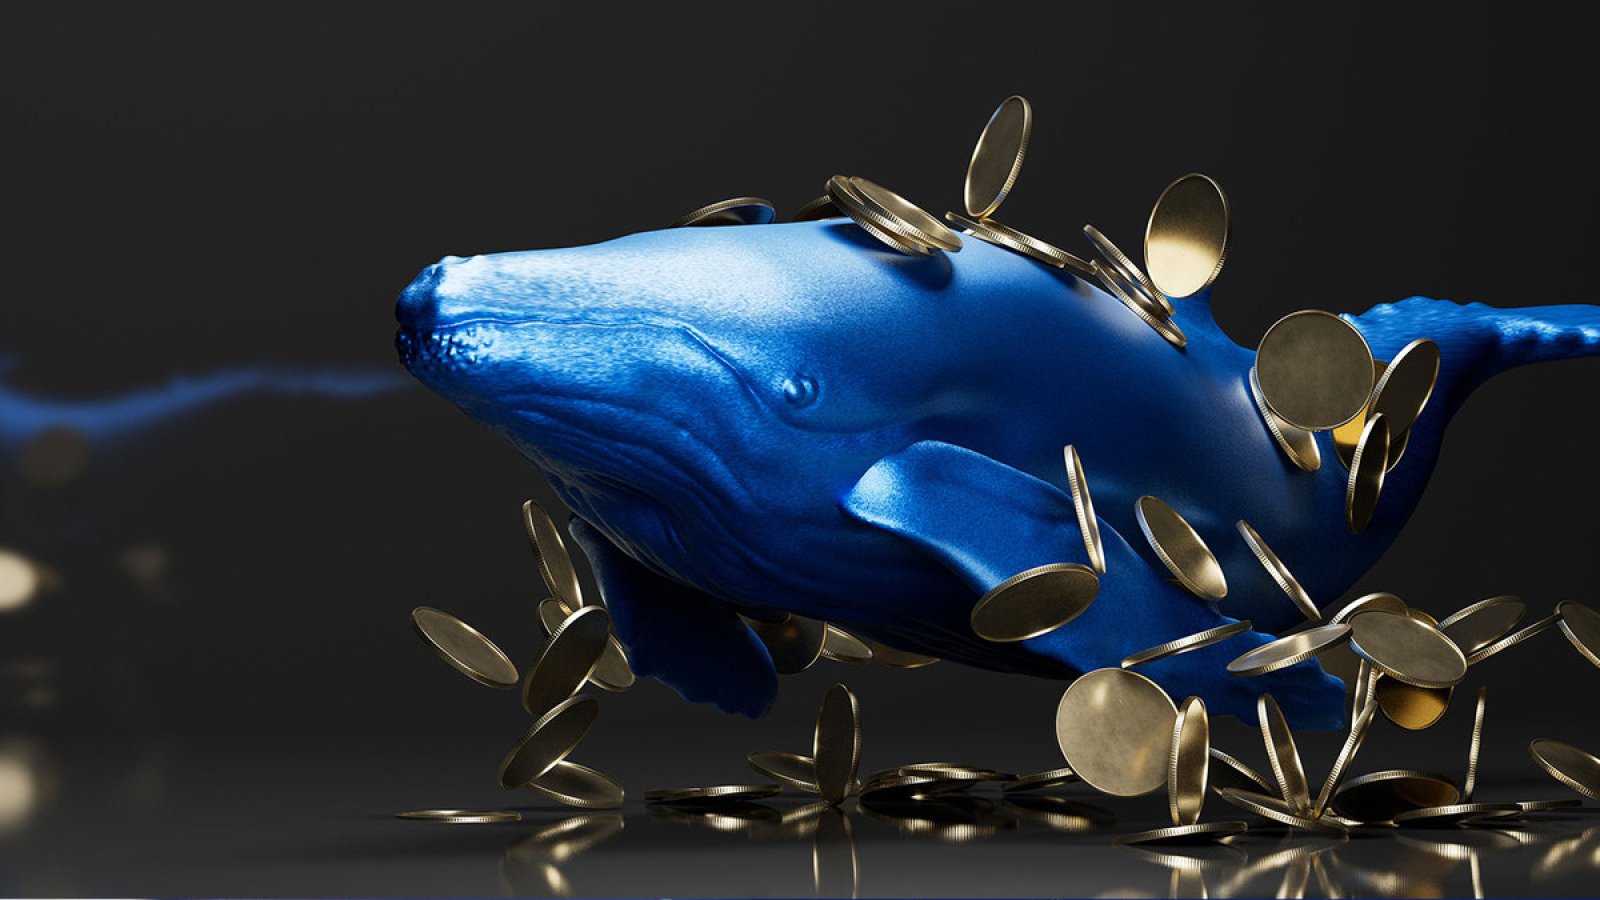 Whales Moving Stablecoins to Exchanges, Here’s What’s Likely Going On